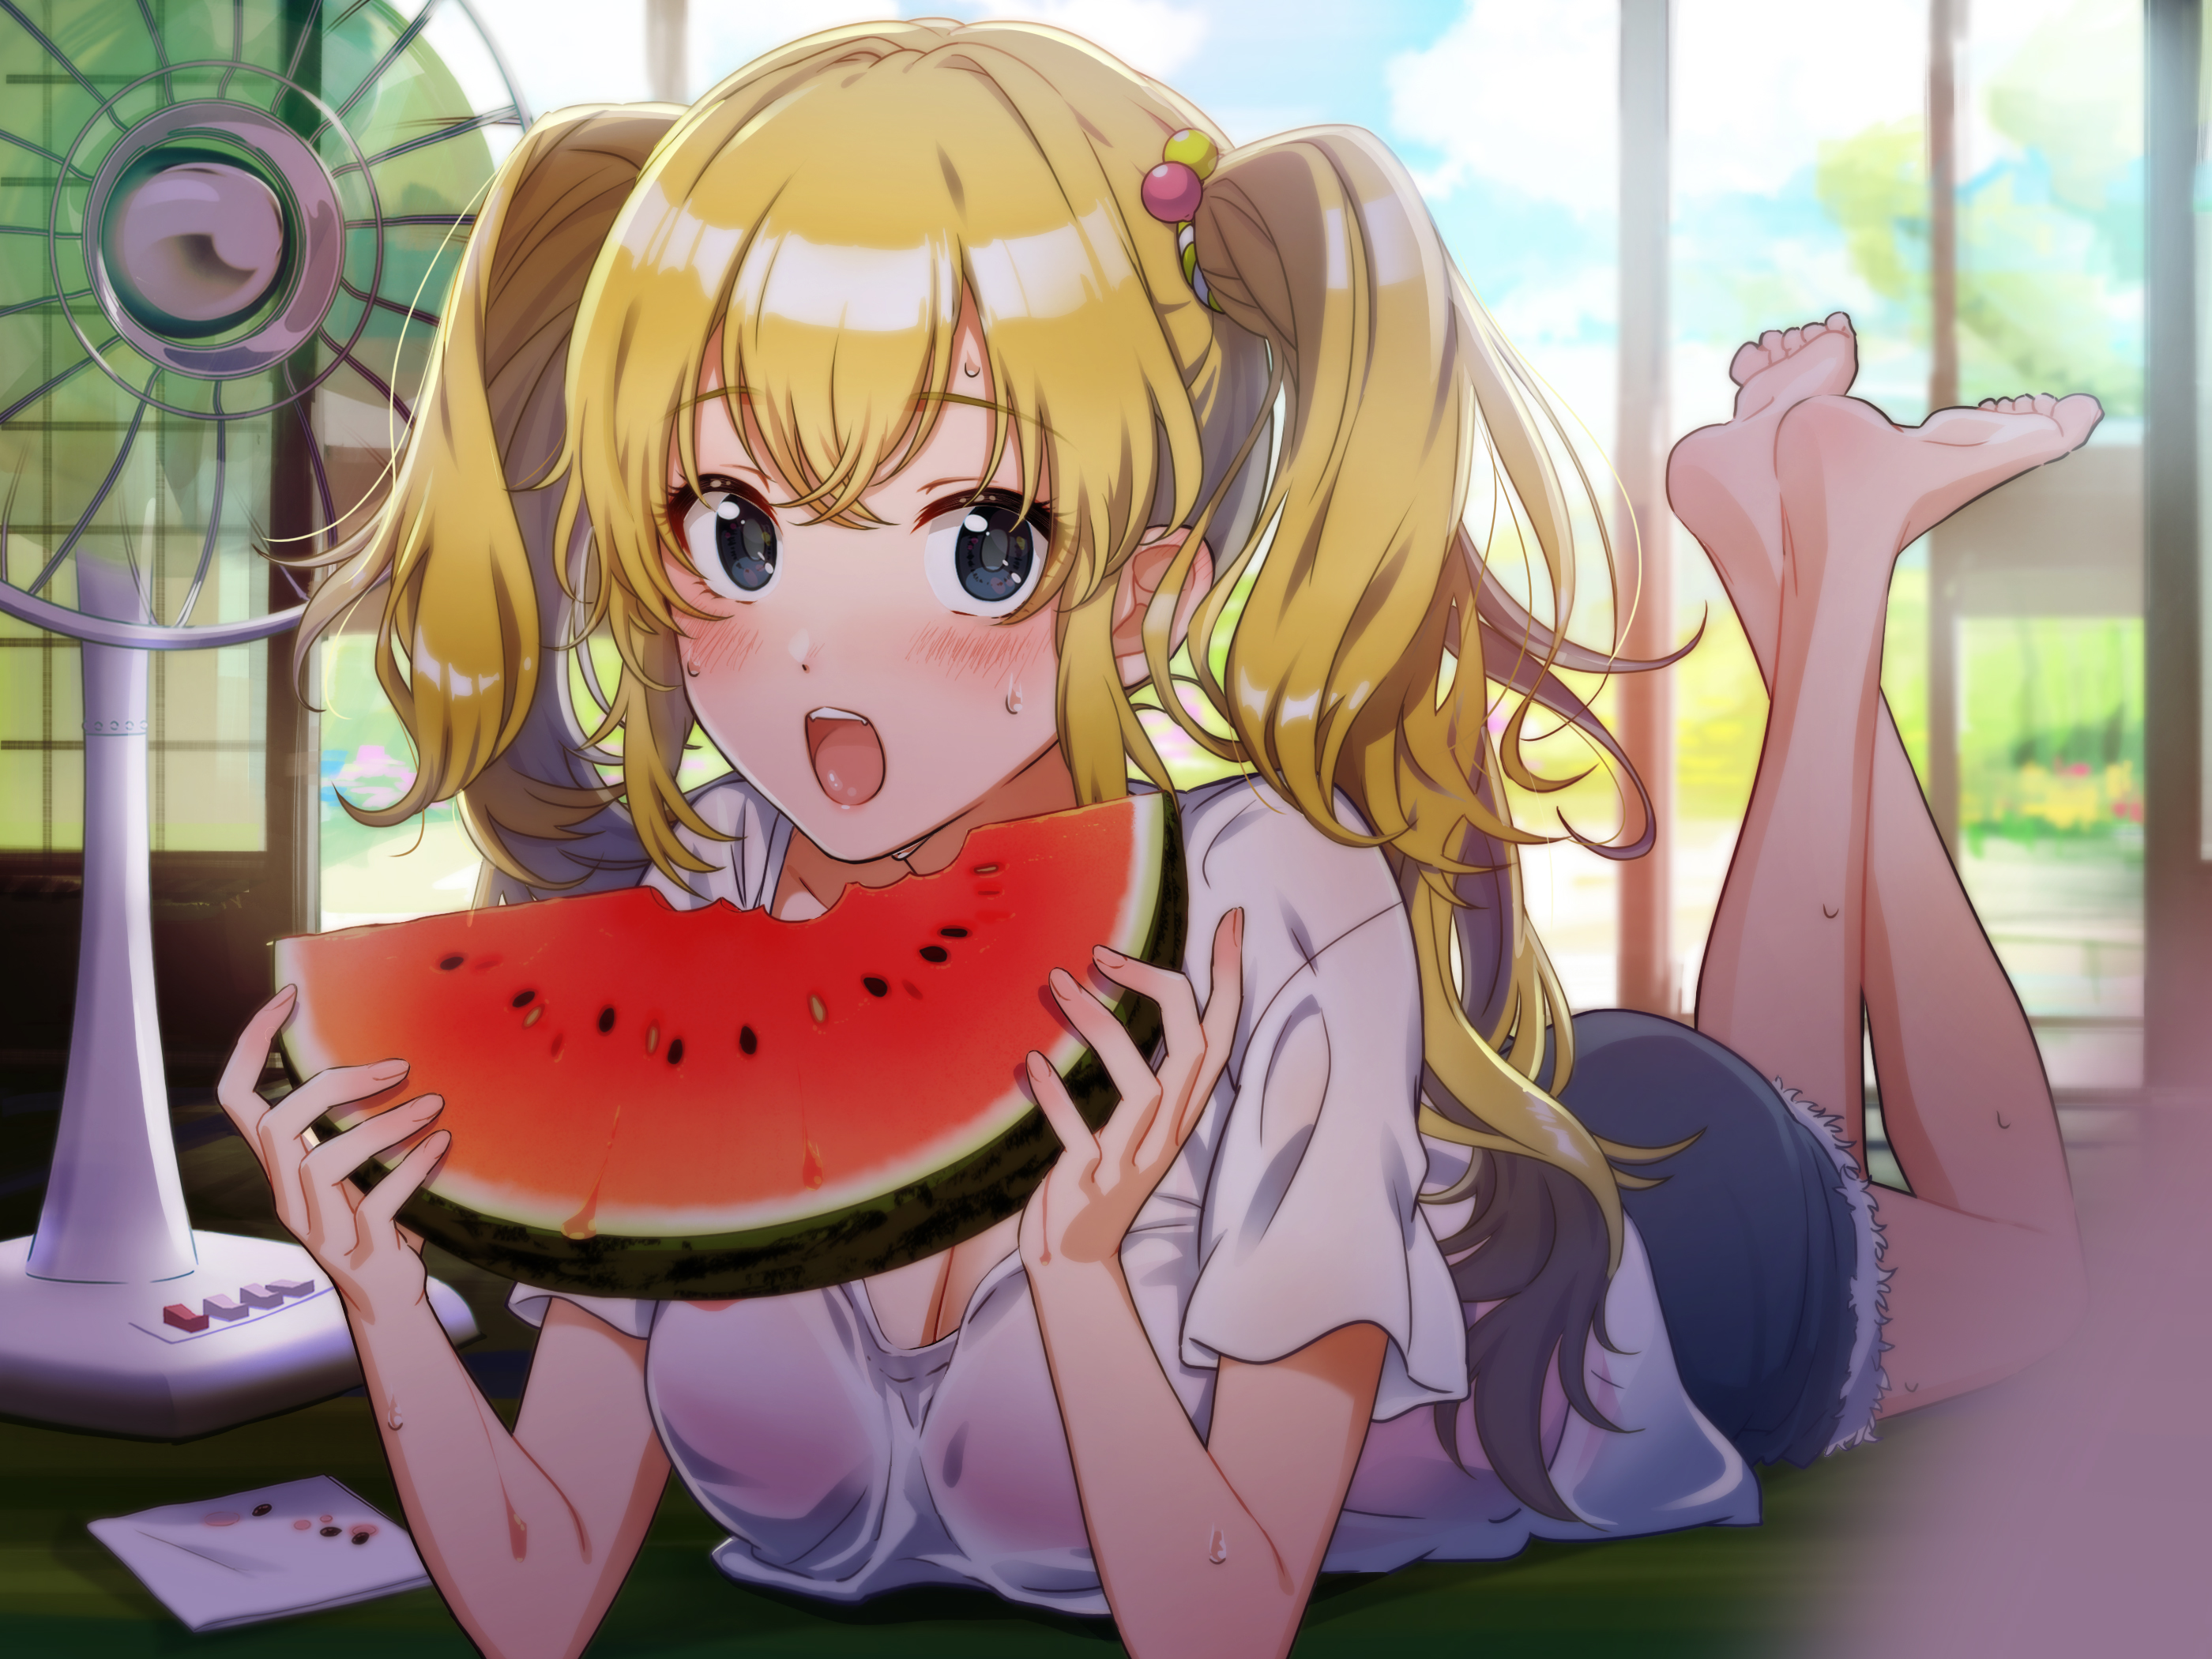 Anime 2800x2100 summer watermelons anime anime girls blonde twintails dark eyes open mouth lying on front feet in the air Yamamoto Miyu artwork